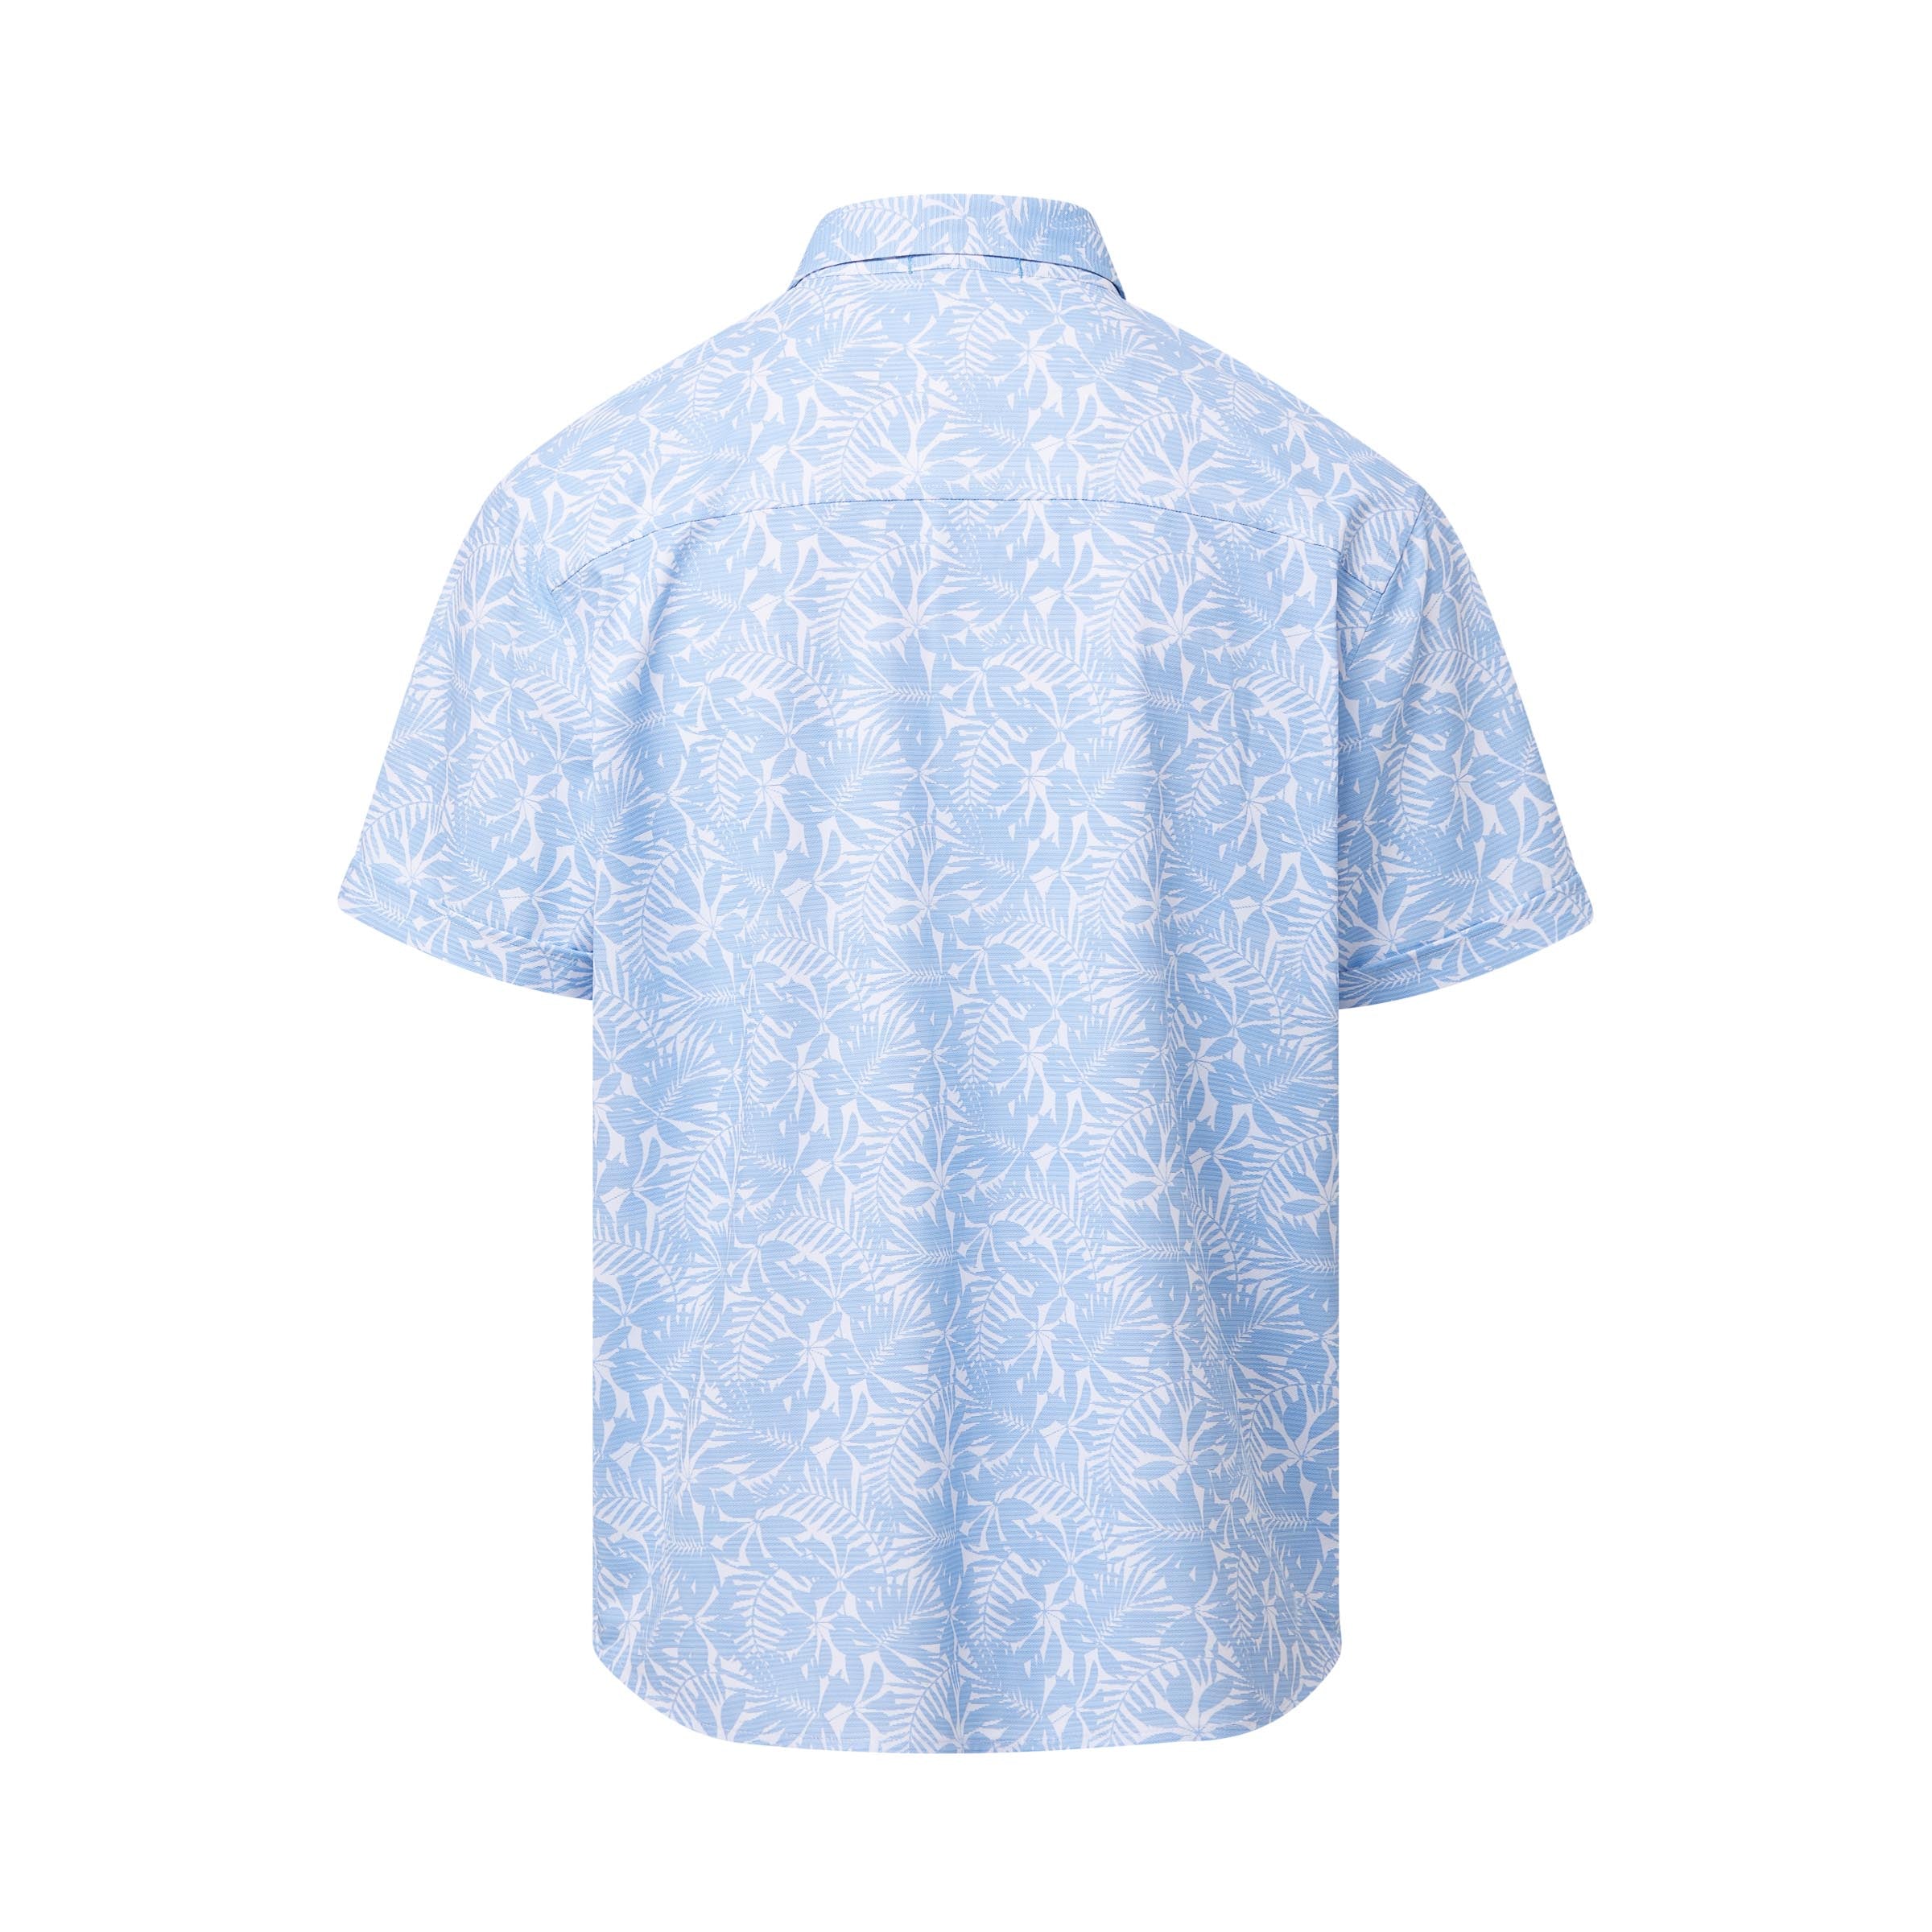 MagnaReady x Arctic Cooling Pique Polo Short Sleeves in Blue Palm